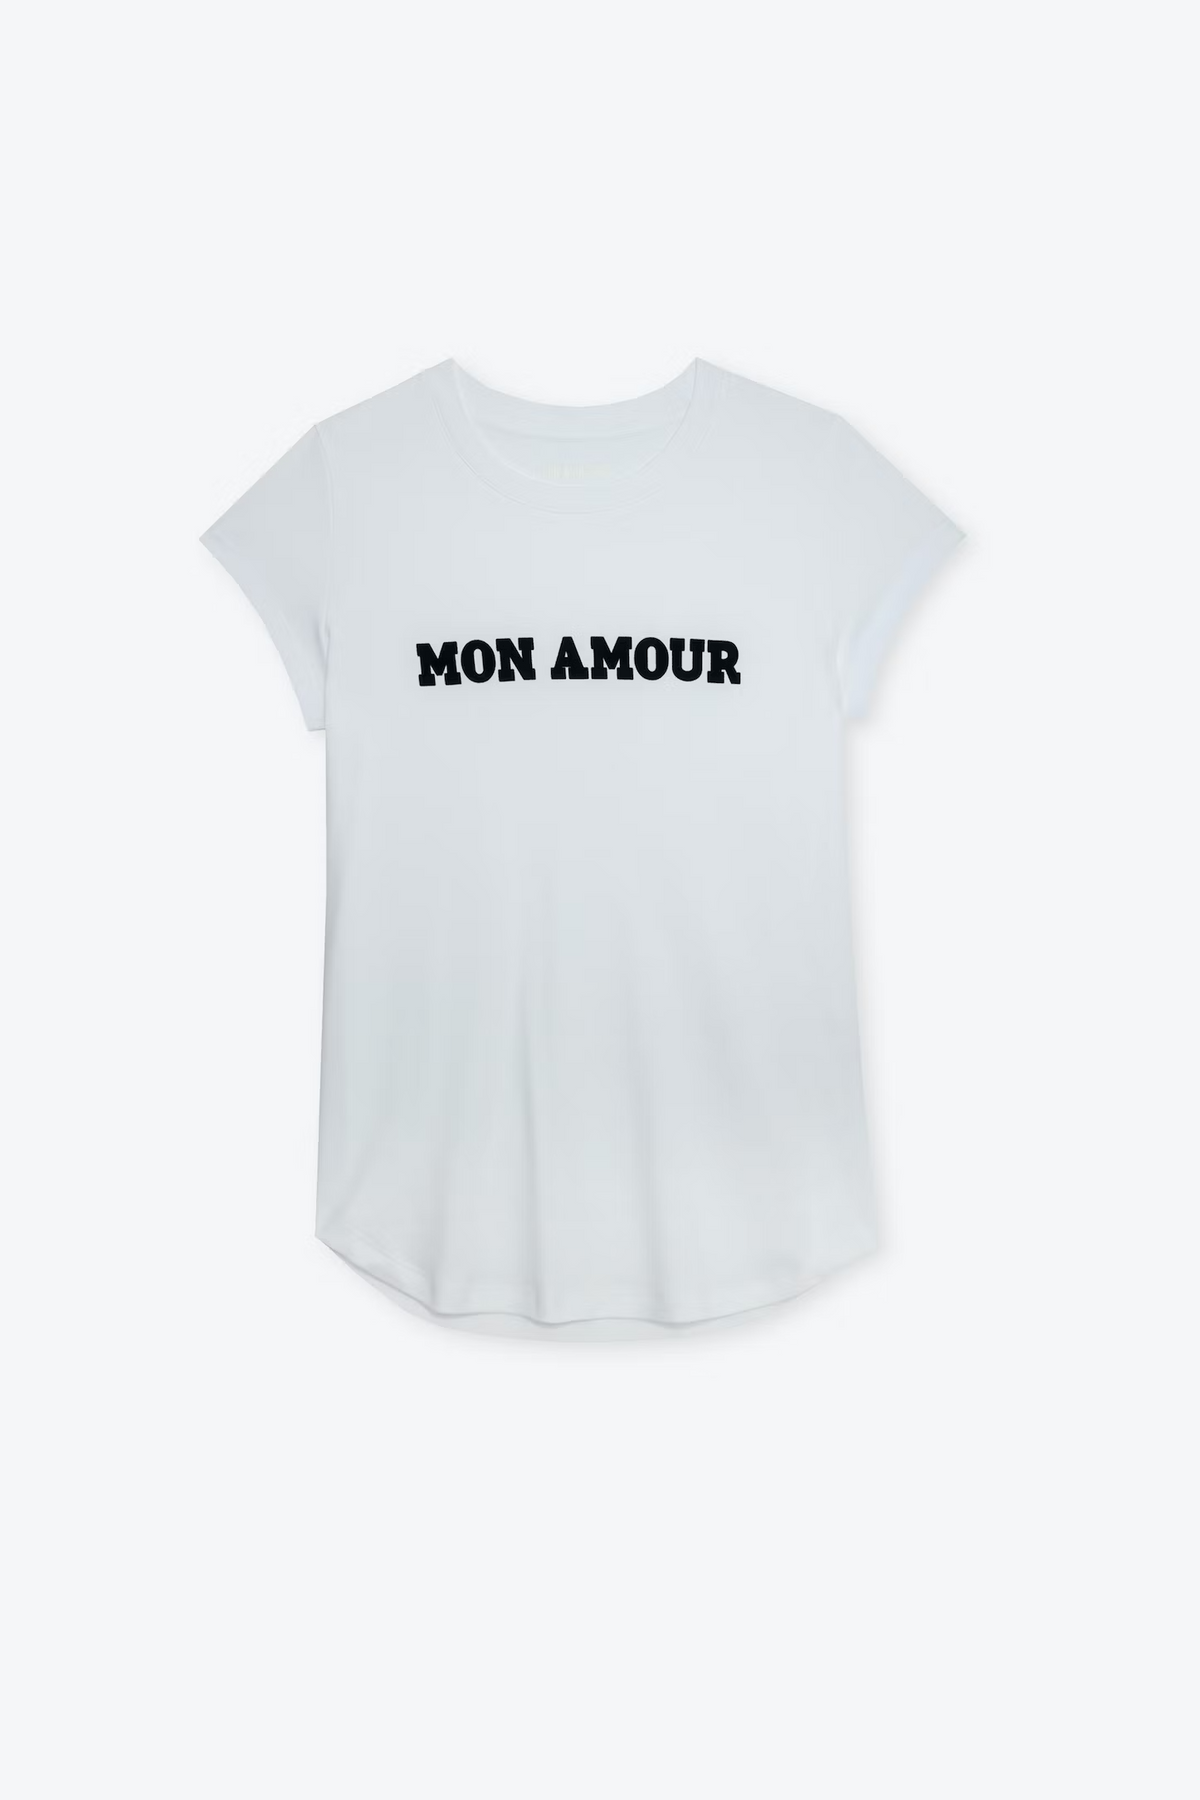 Woop Mon Amour - Blanc